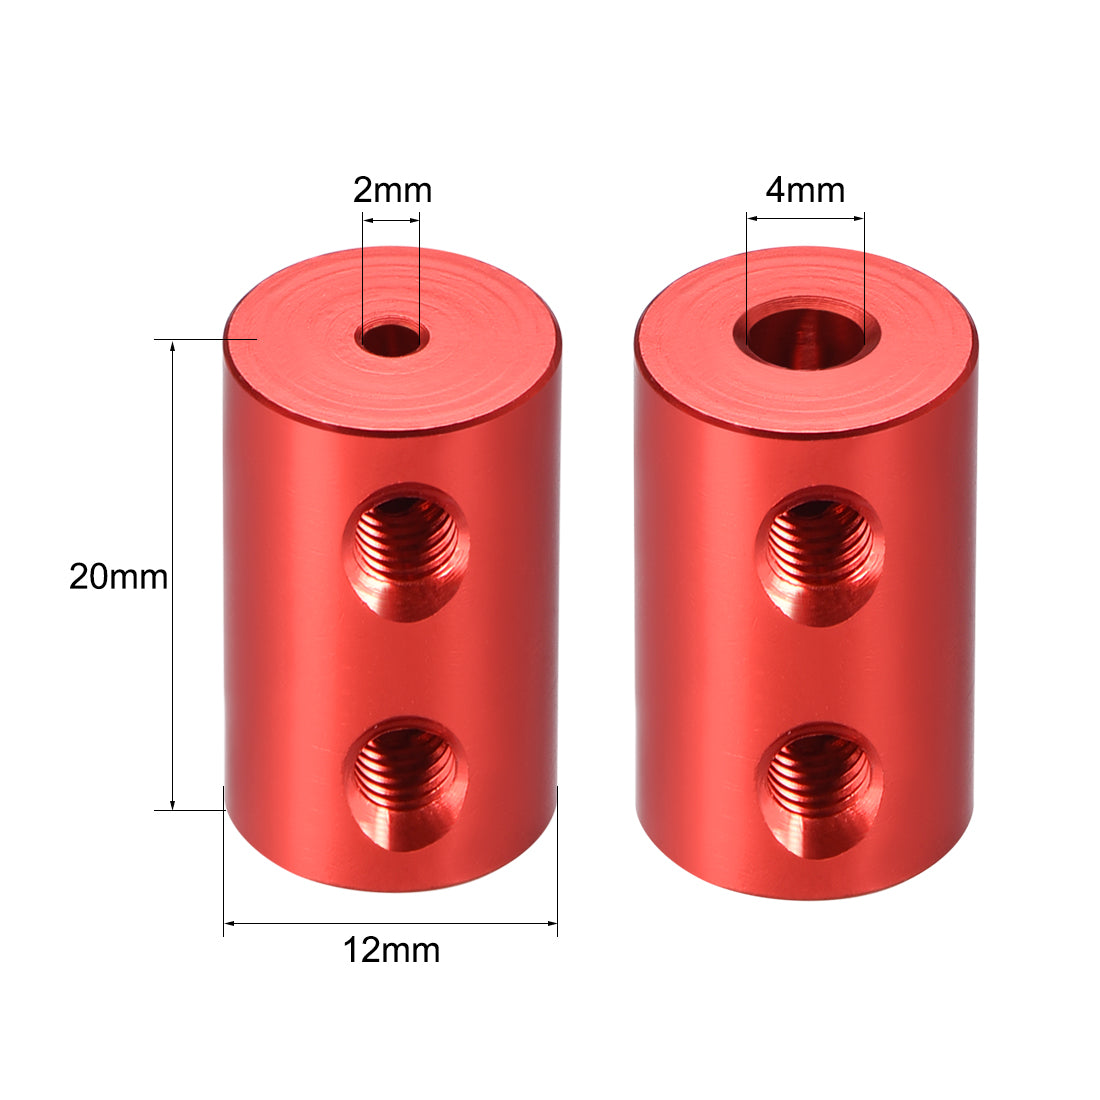 uxcell Uxcell Shaft Coupling 2mm to 4mm Bore L20xD12 Robot Motor Wheel Rigid Coupler Connector Red 2 Pcs